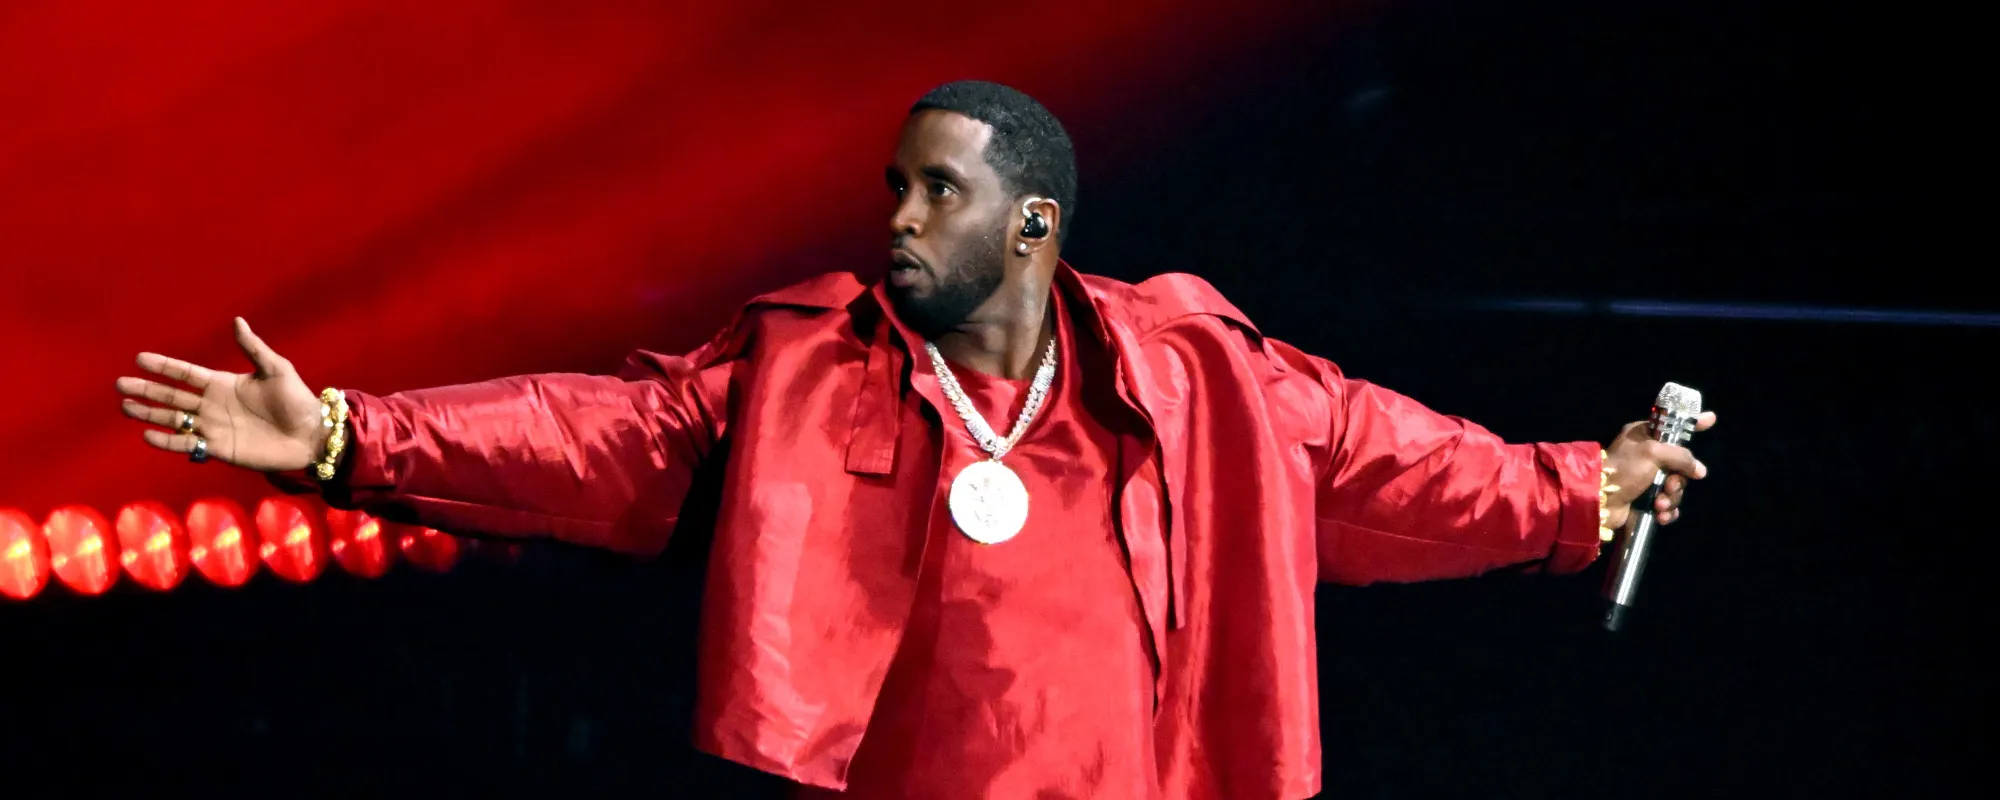 Diddy Gives Career-Spanning Performance at VMAs While Receiving Global Icon Award